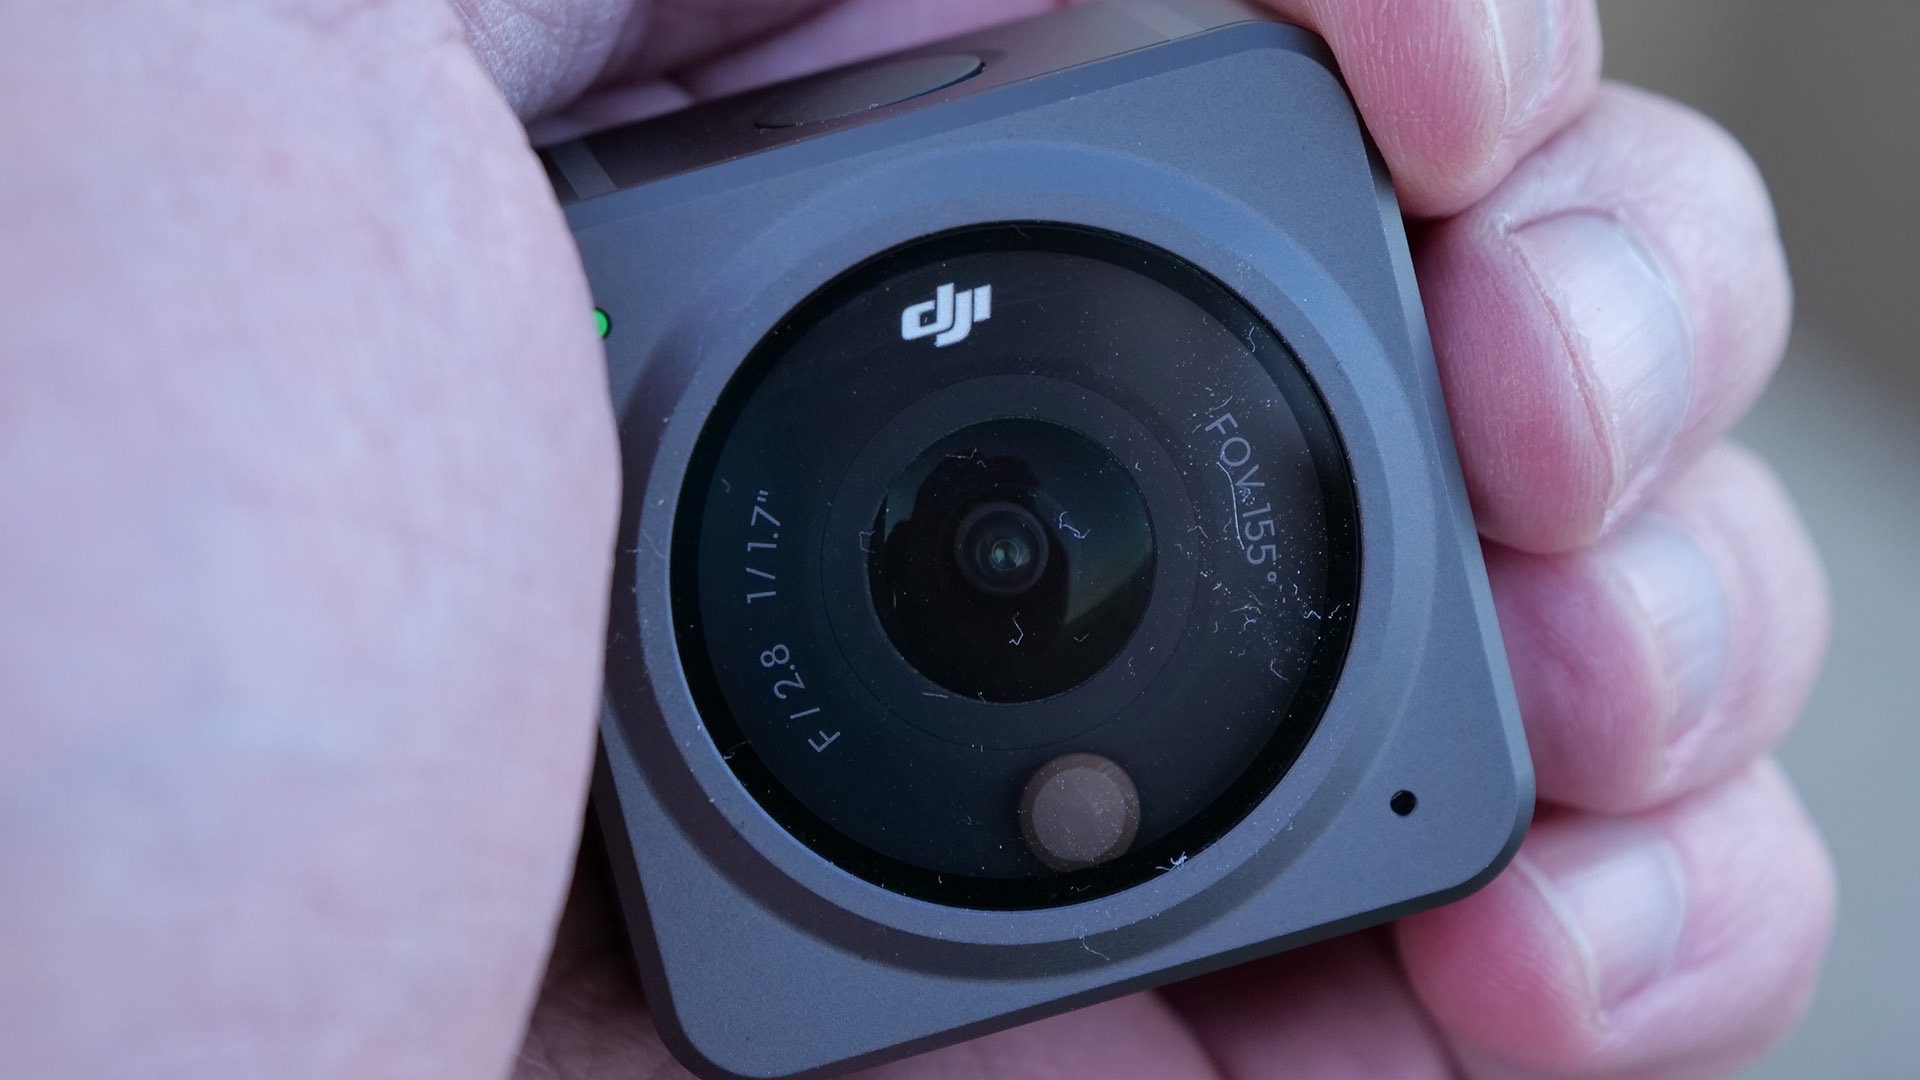 DJI Action 2: Their Most Powerful Action Camera Yet!